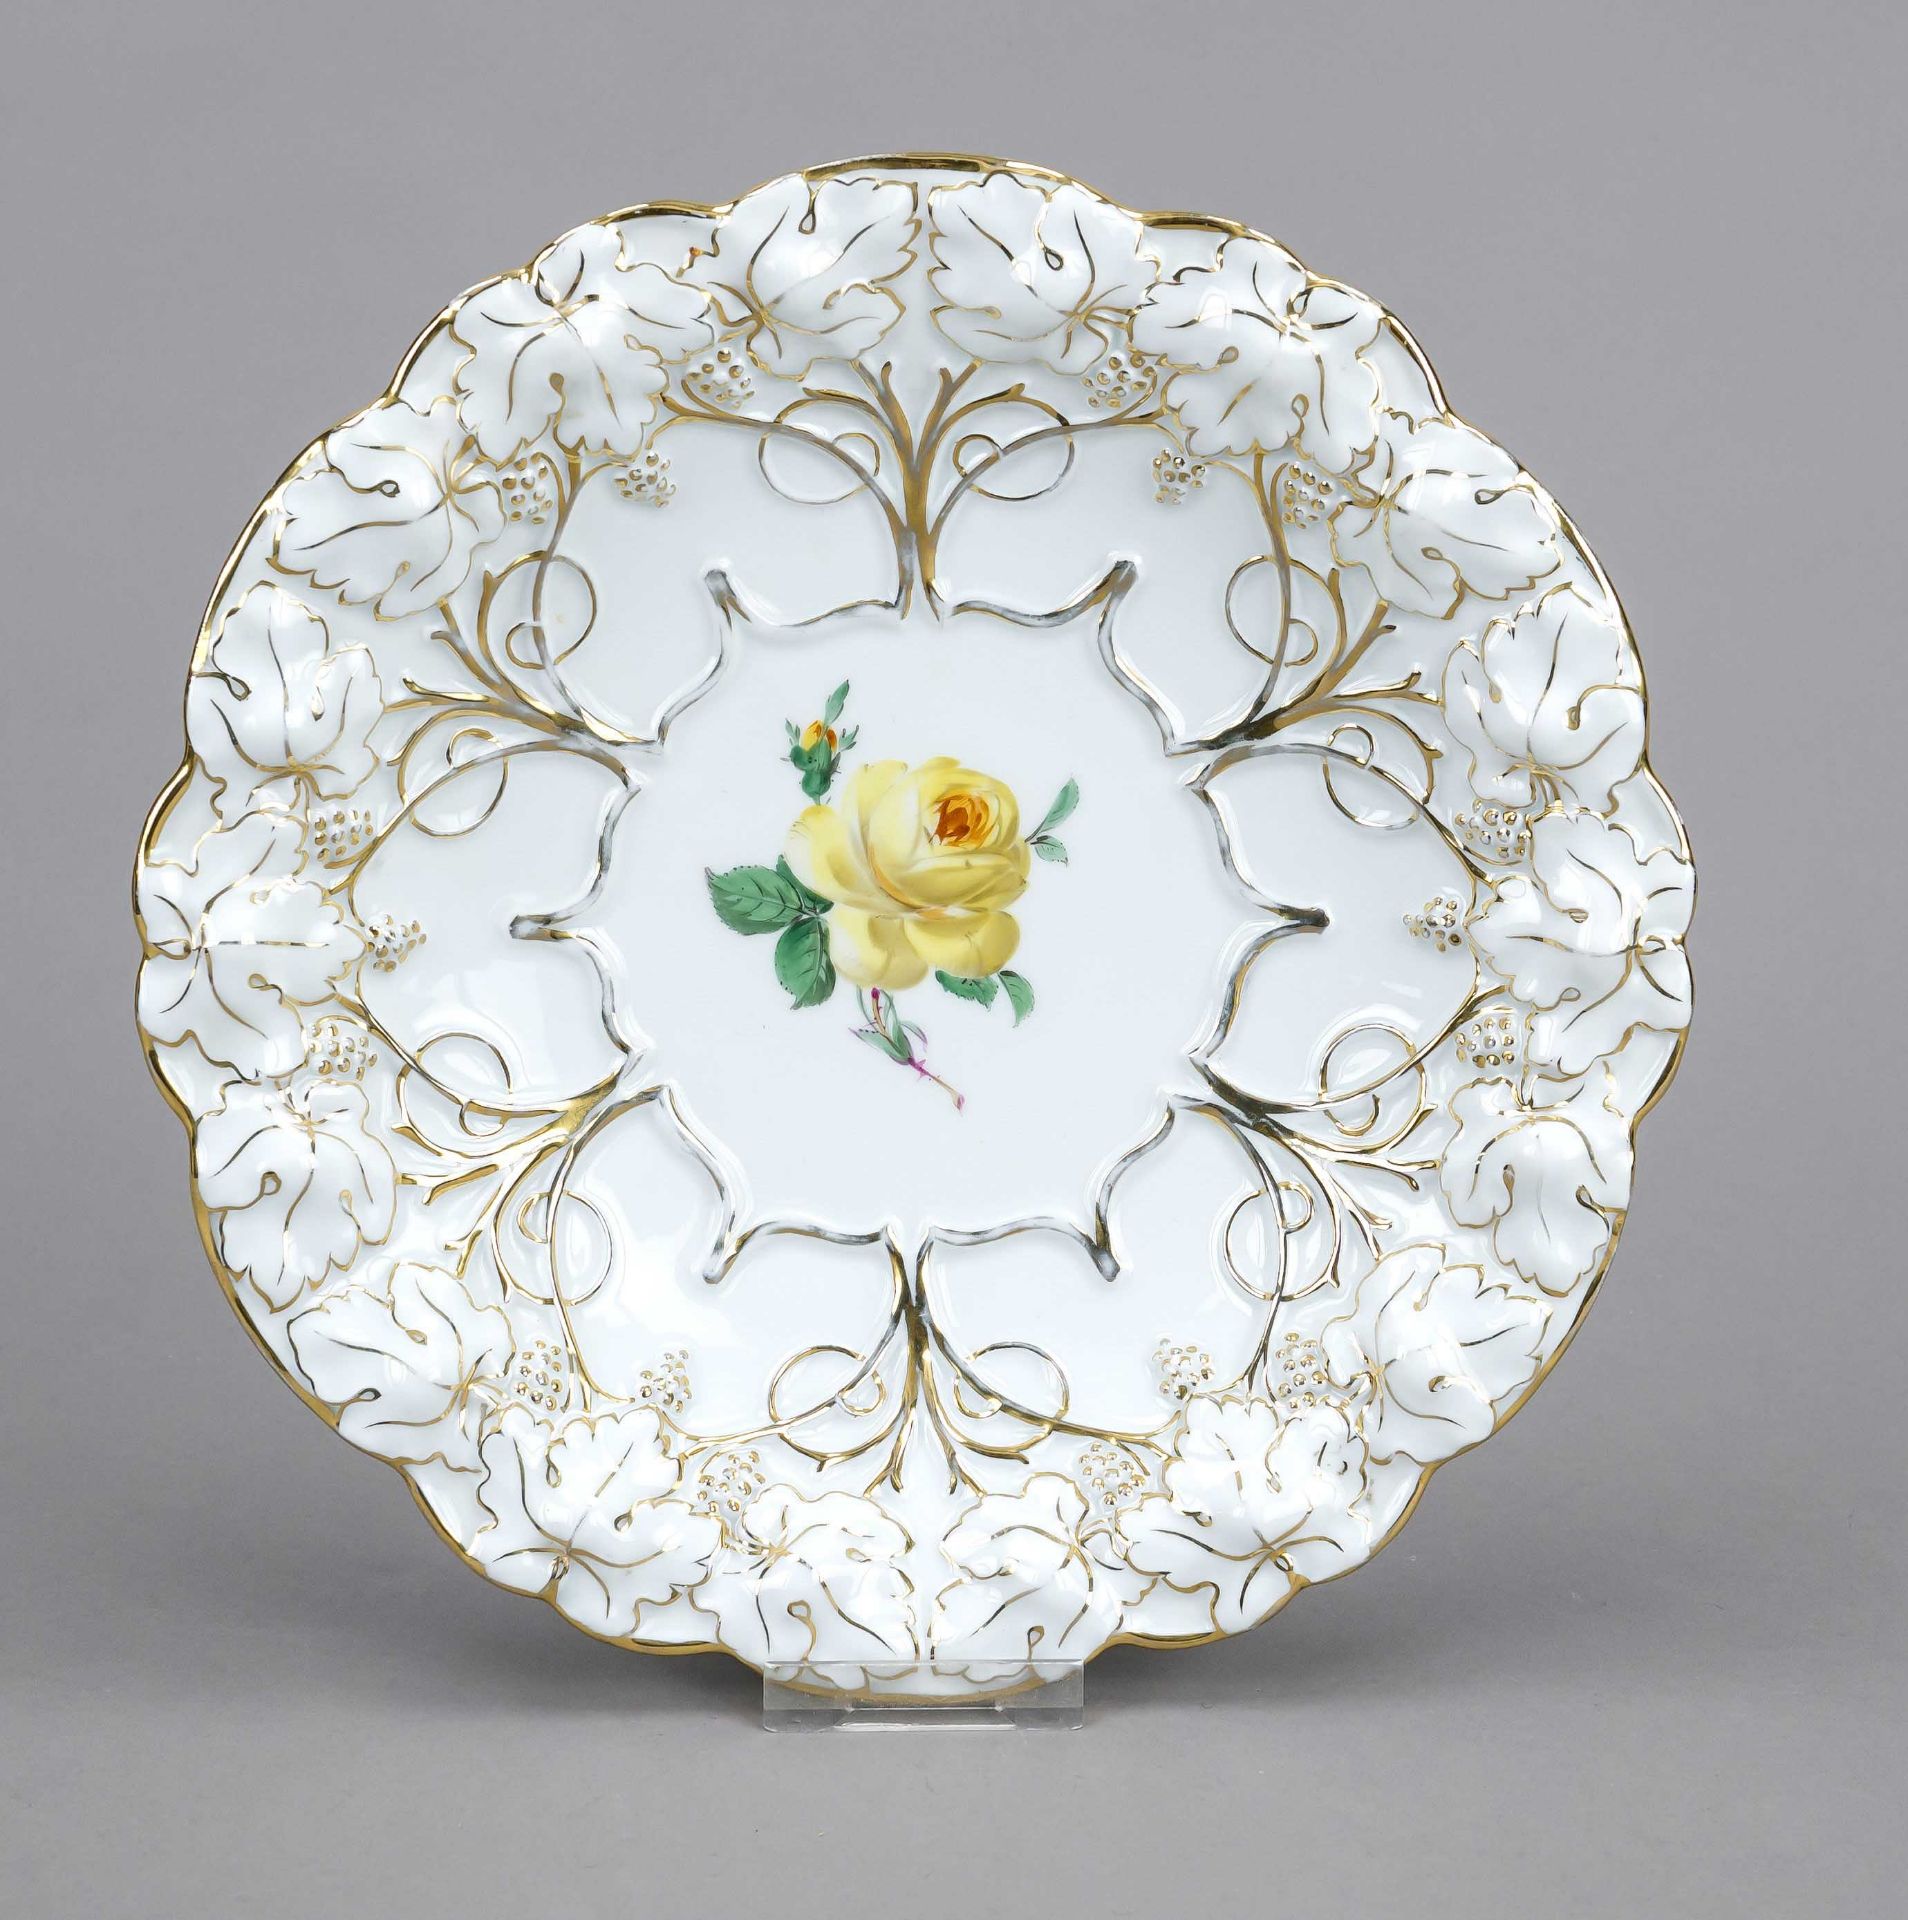 Magnificent bowl, Meissen, Pfeiffer period (1924-34), 1st choice, curved shape, floral painting in